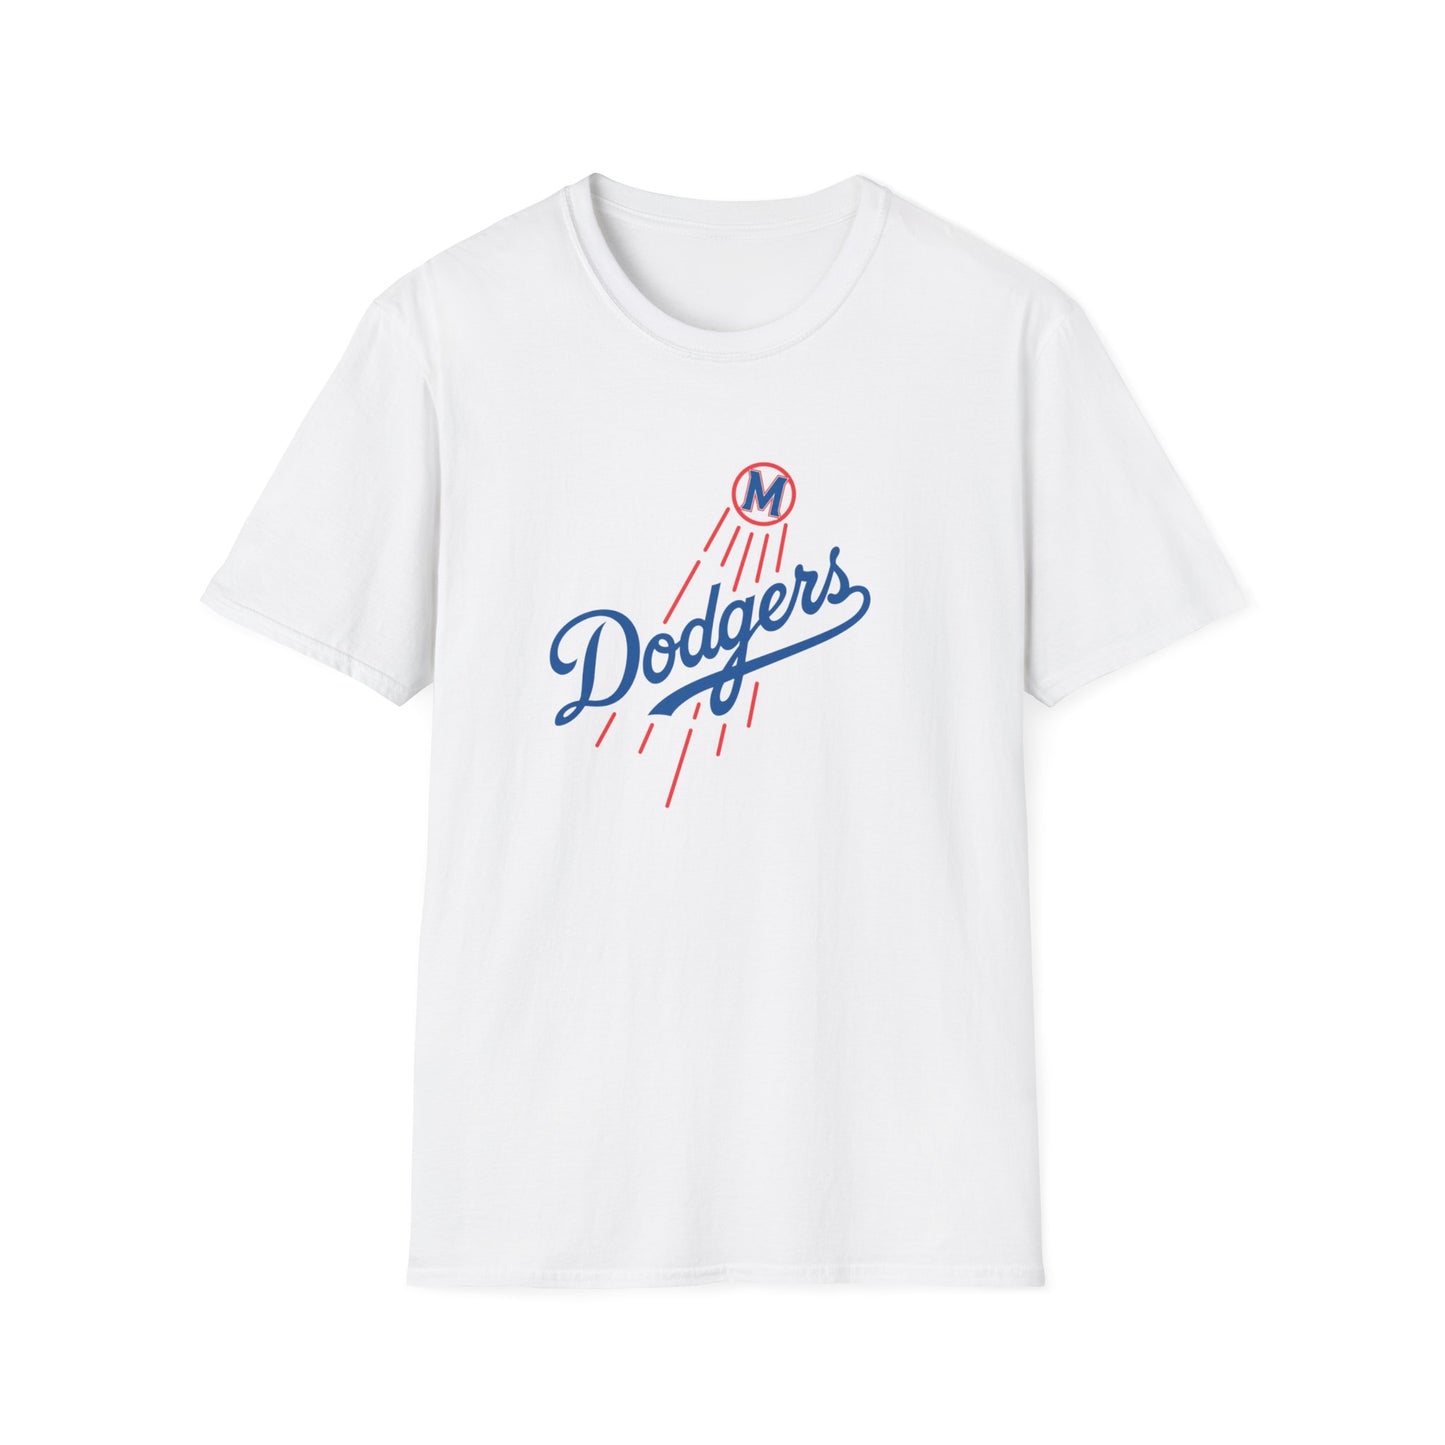 Morris Dodgers Softstyle T-Shirt